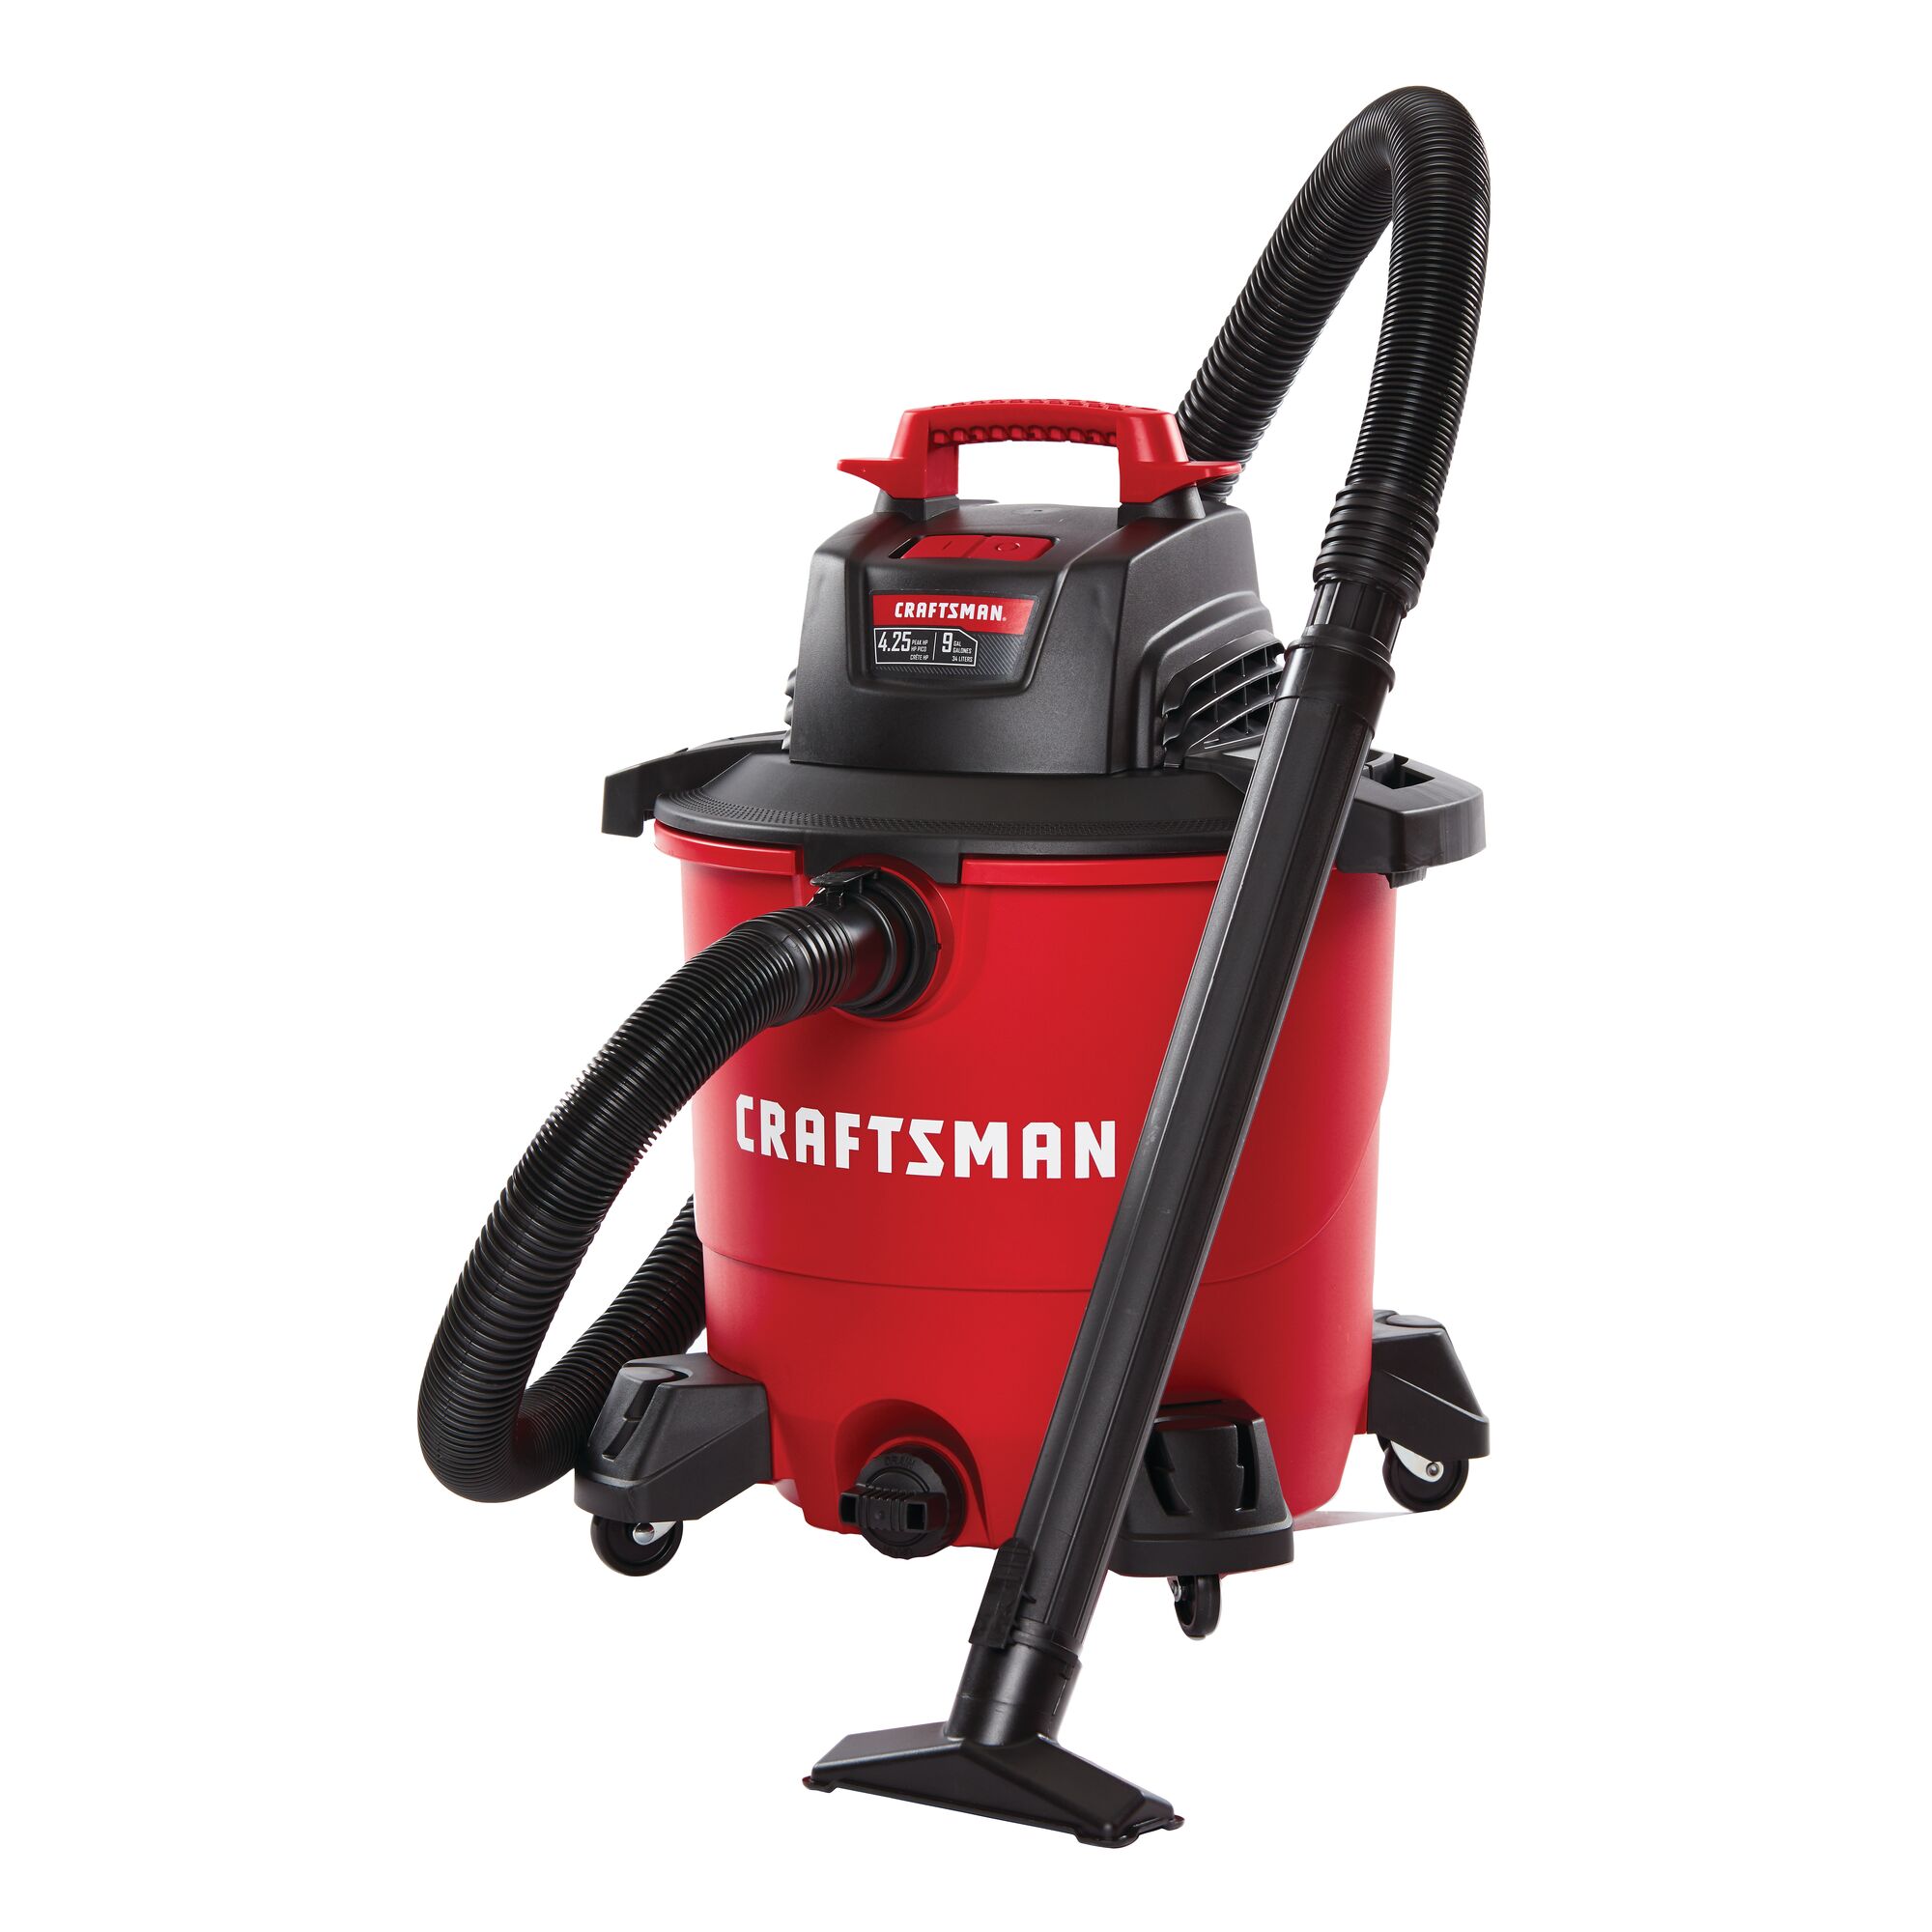 View of CRAFTSMAN Accessories: Vacuums on white background